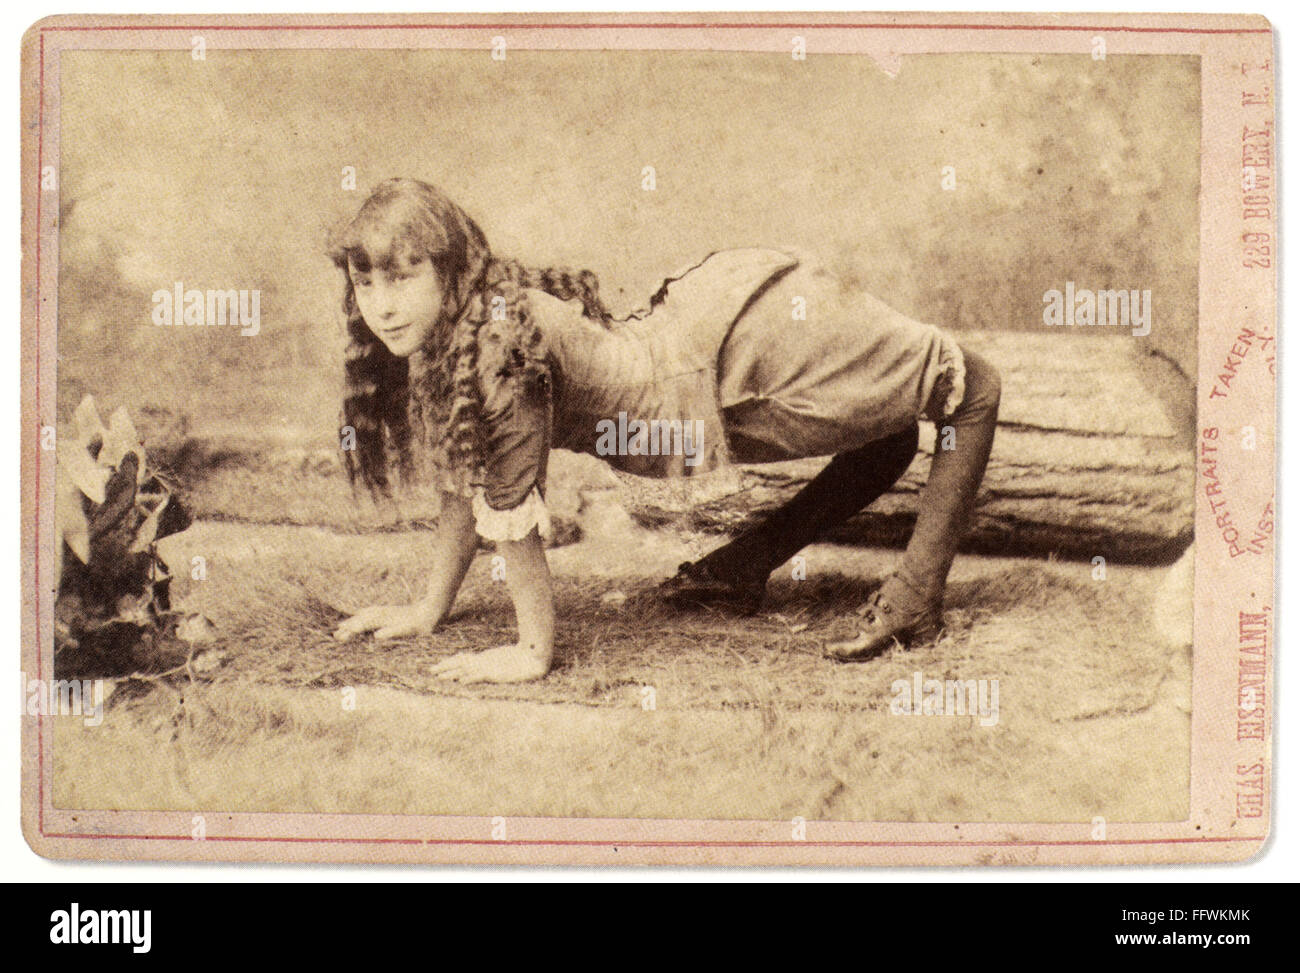 SIDESHOW: CAMEL GIRL, 1886. /nSideshow pitch card featuring Ella Harper, the 'Camel Girl,' 1886. Stock Photo